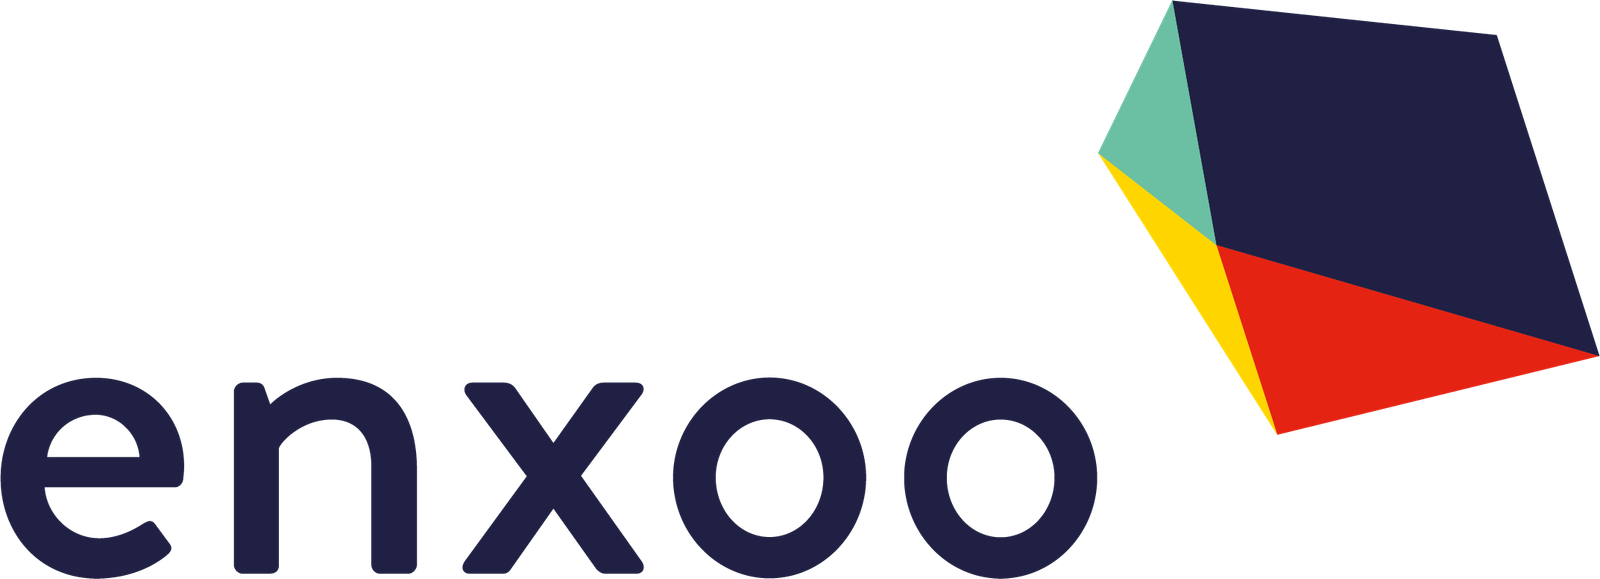 Enxoo Partners with LastMileXchange to Automate Processes